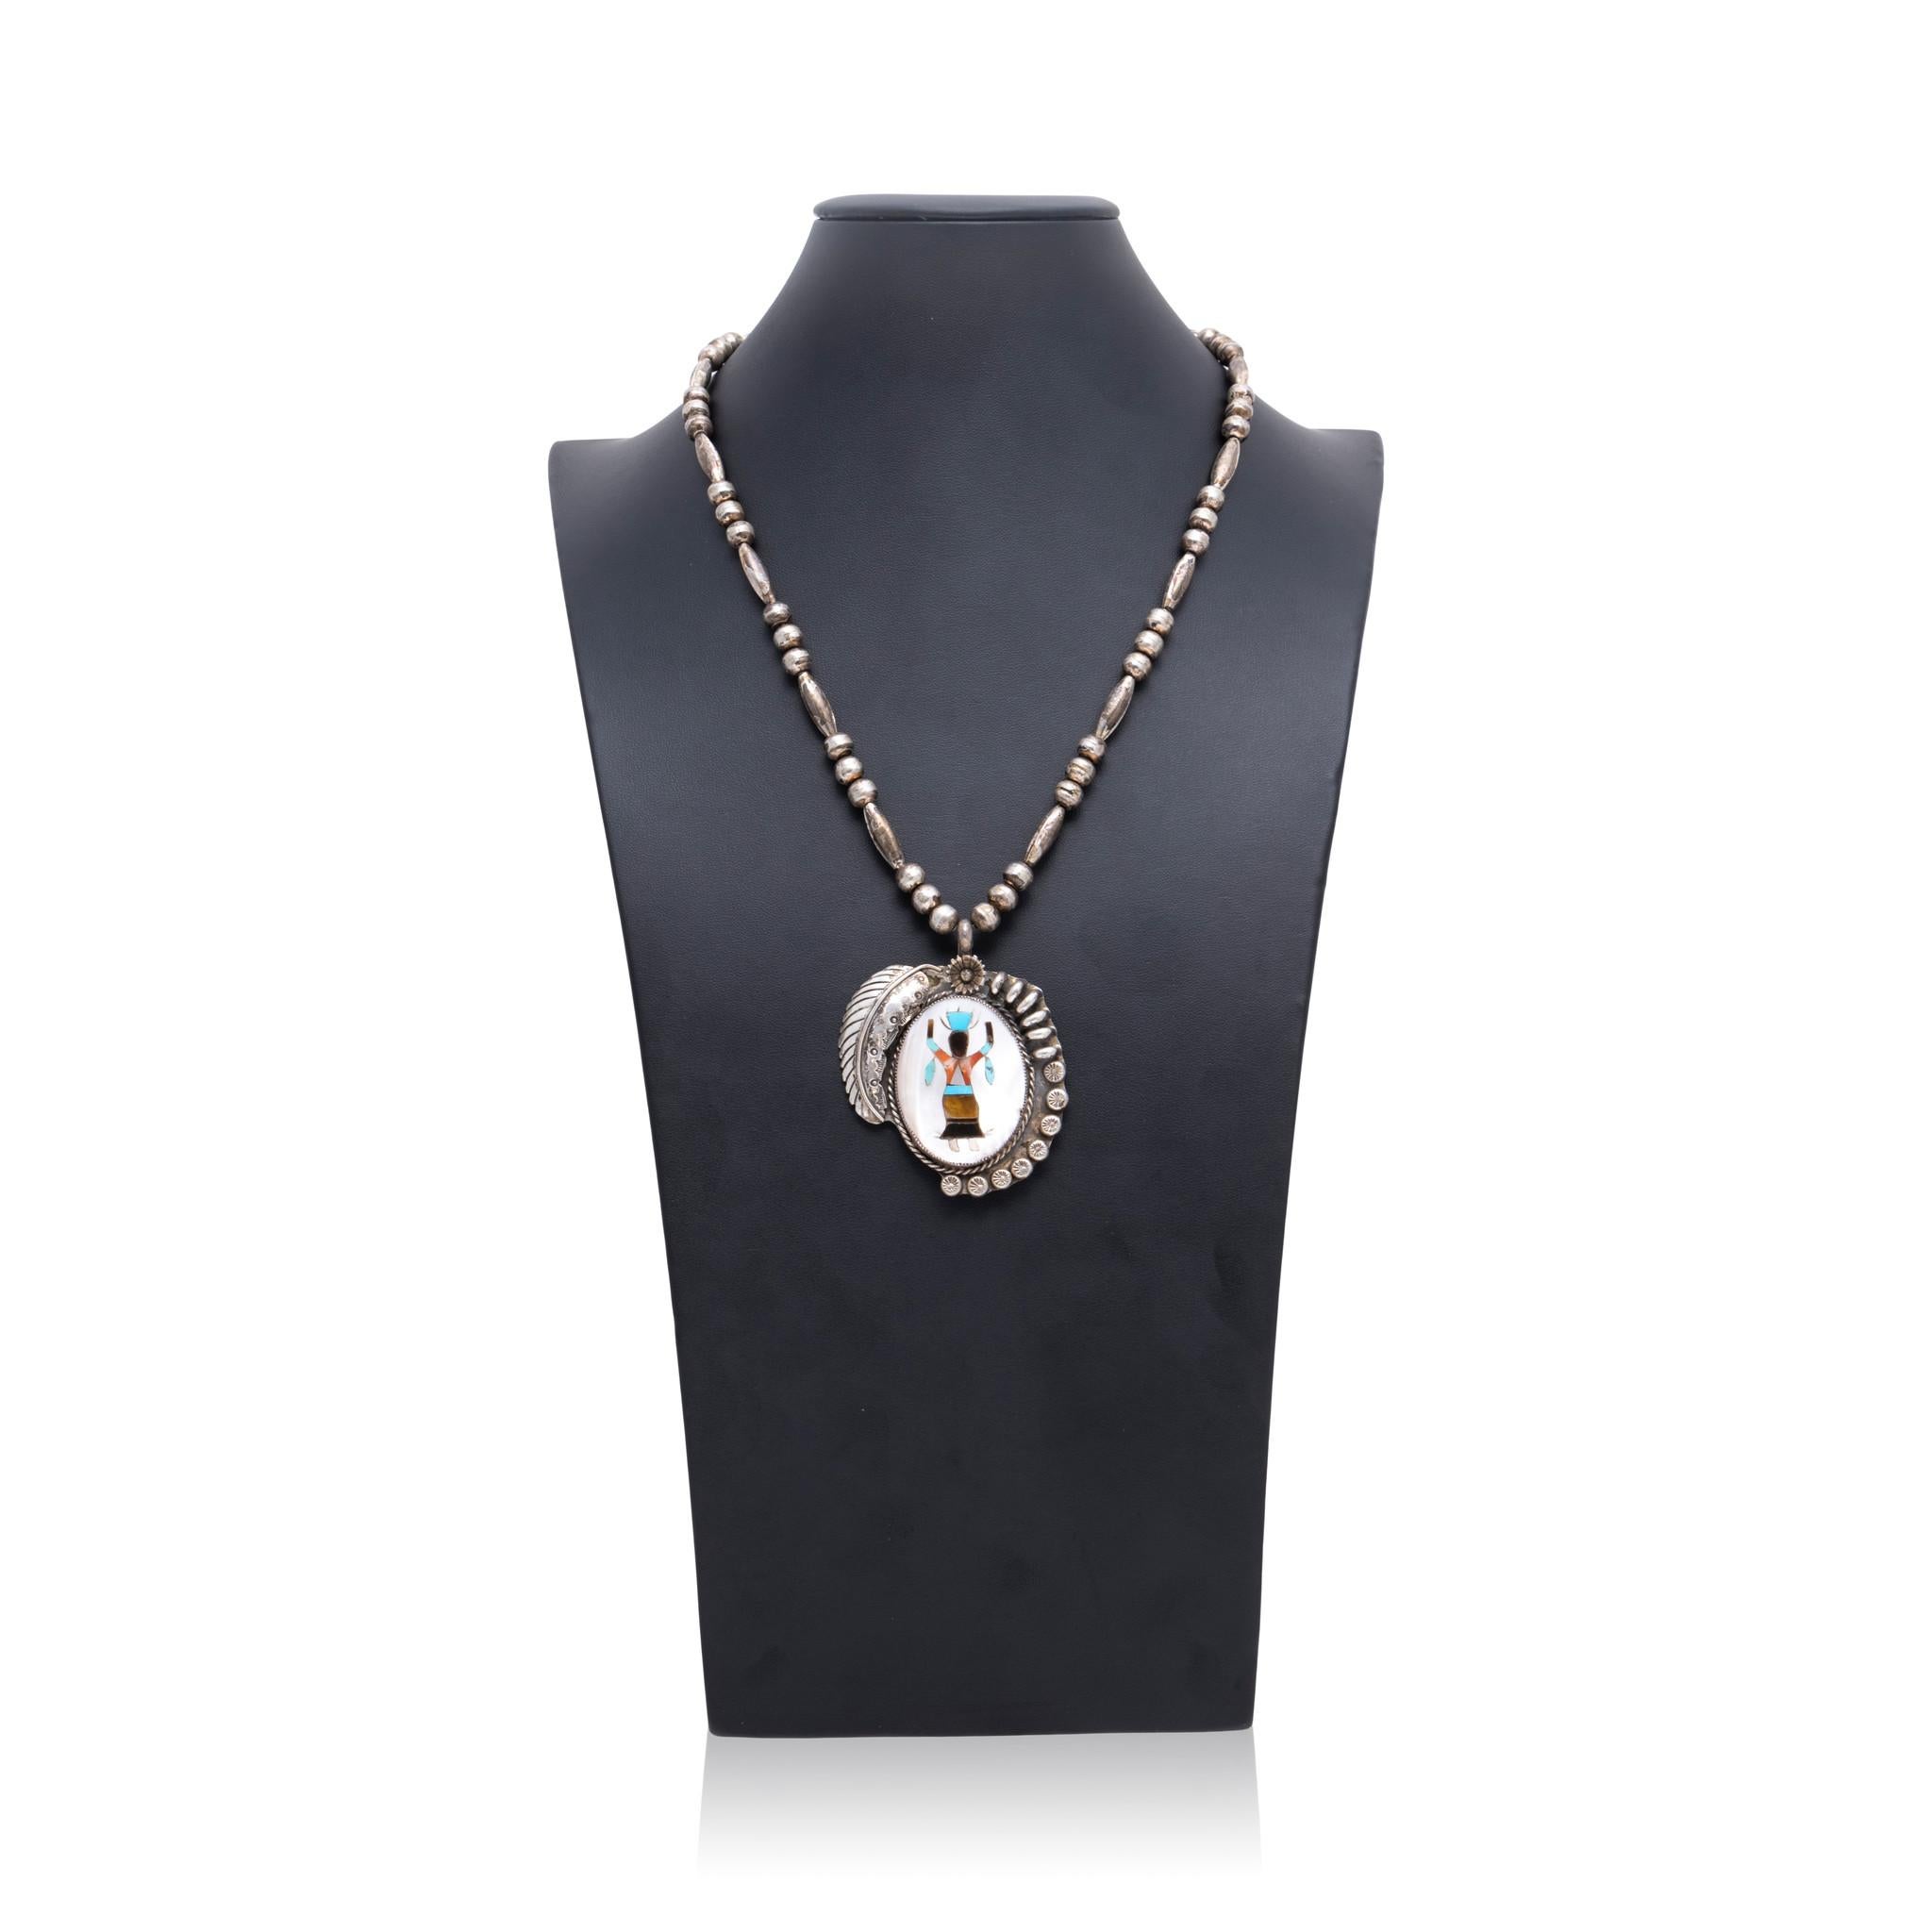 Native American Navajo Indian dancer multi inlaid stone necklace. Large pendant with mother of pearl background including amber, onyx, spiny oyster, and turquoise dancer figure in center. Framed by twisted rope border, stamped sterling beads, and